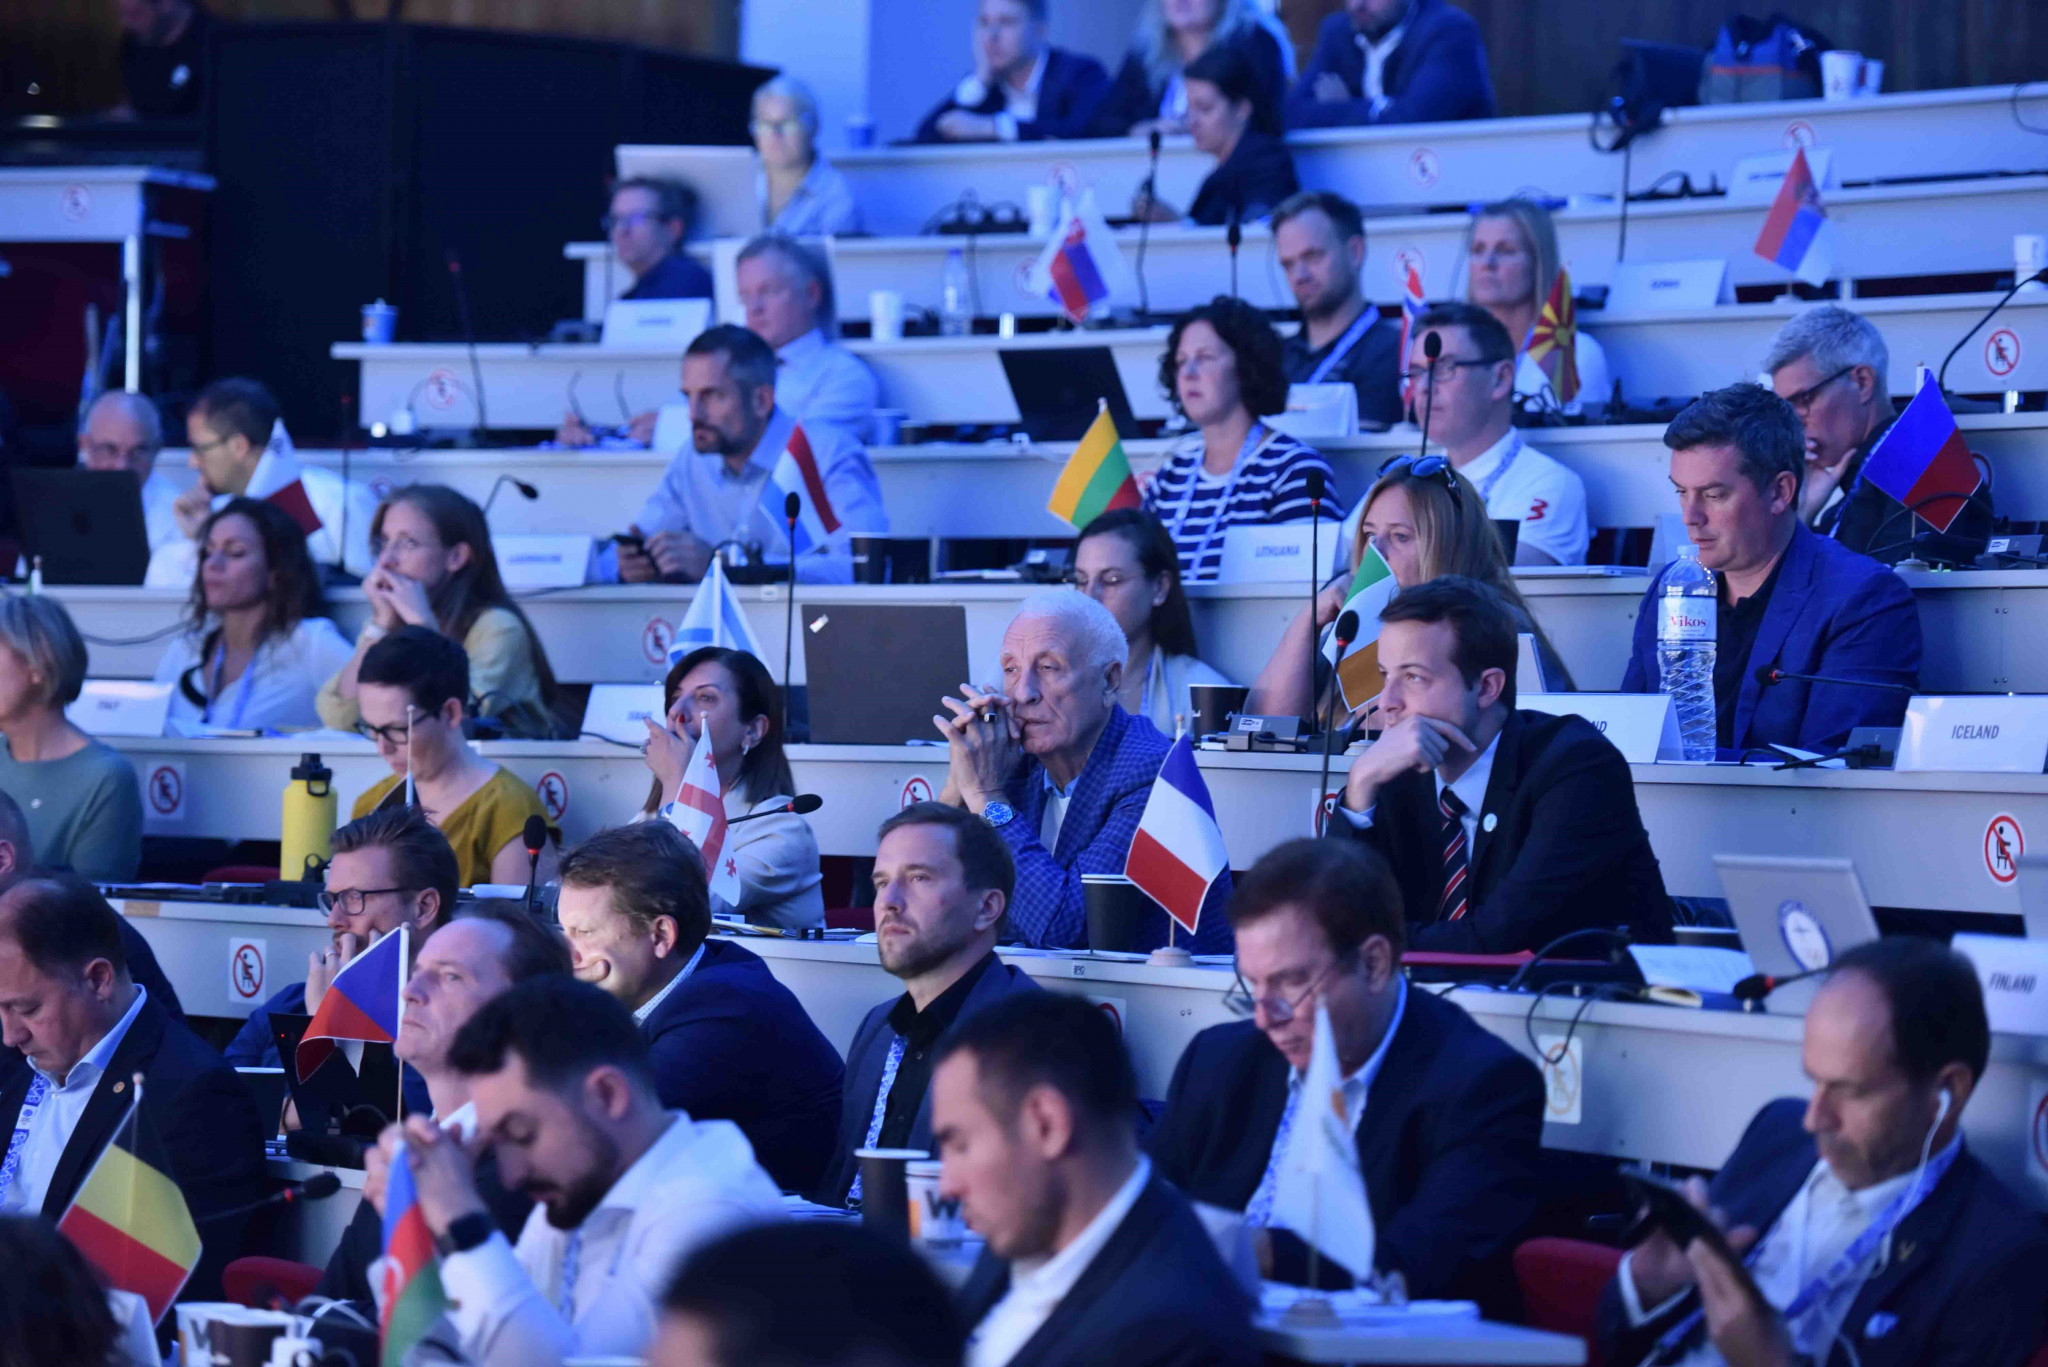 National Olympic Committee representatives watch on at the International Olympic Academy in Ancient Olympia ©EOC